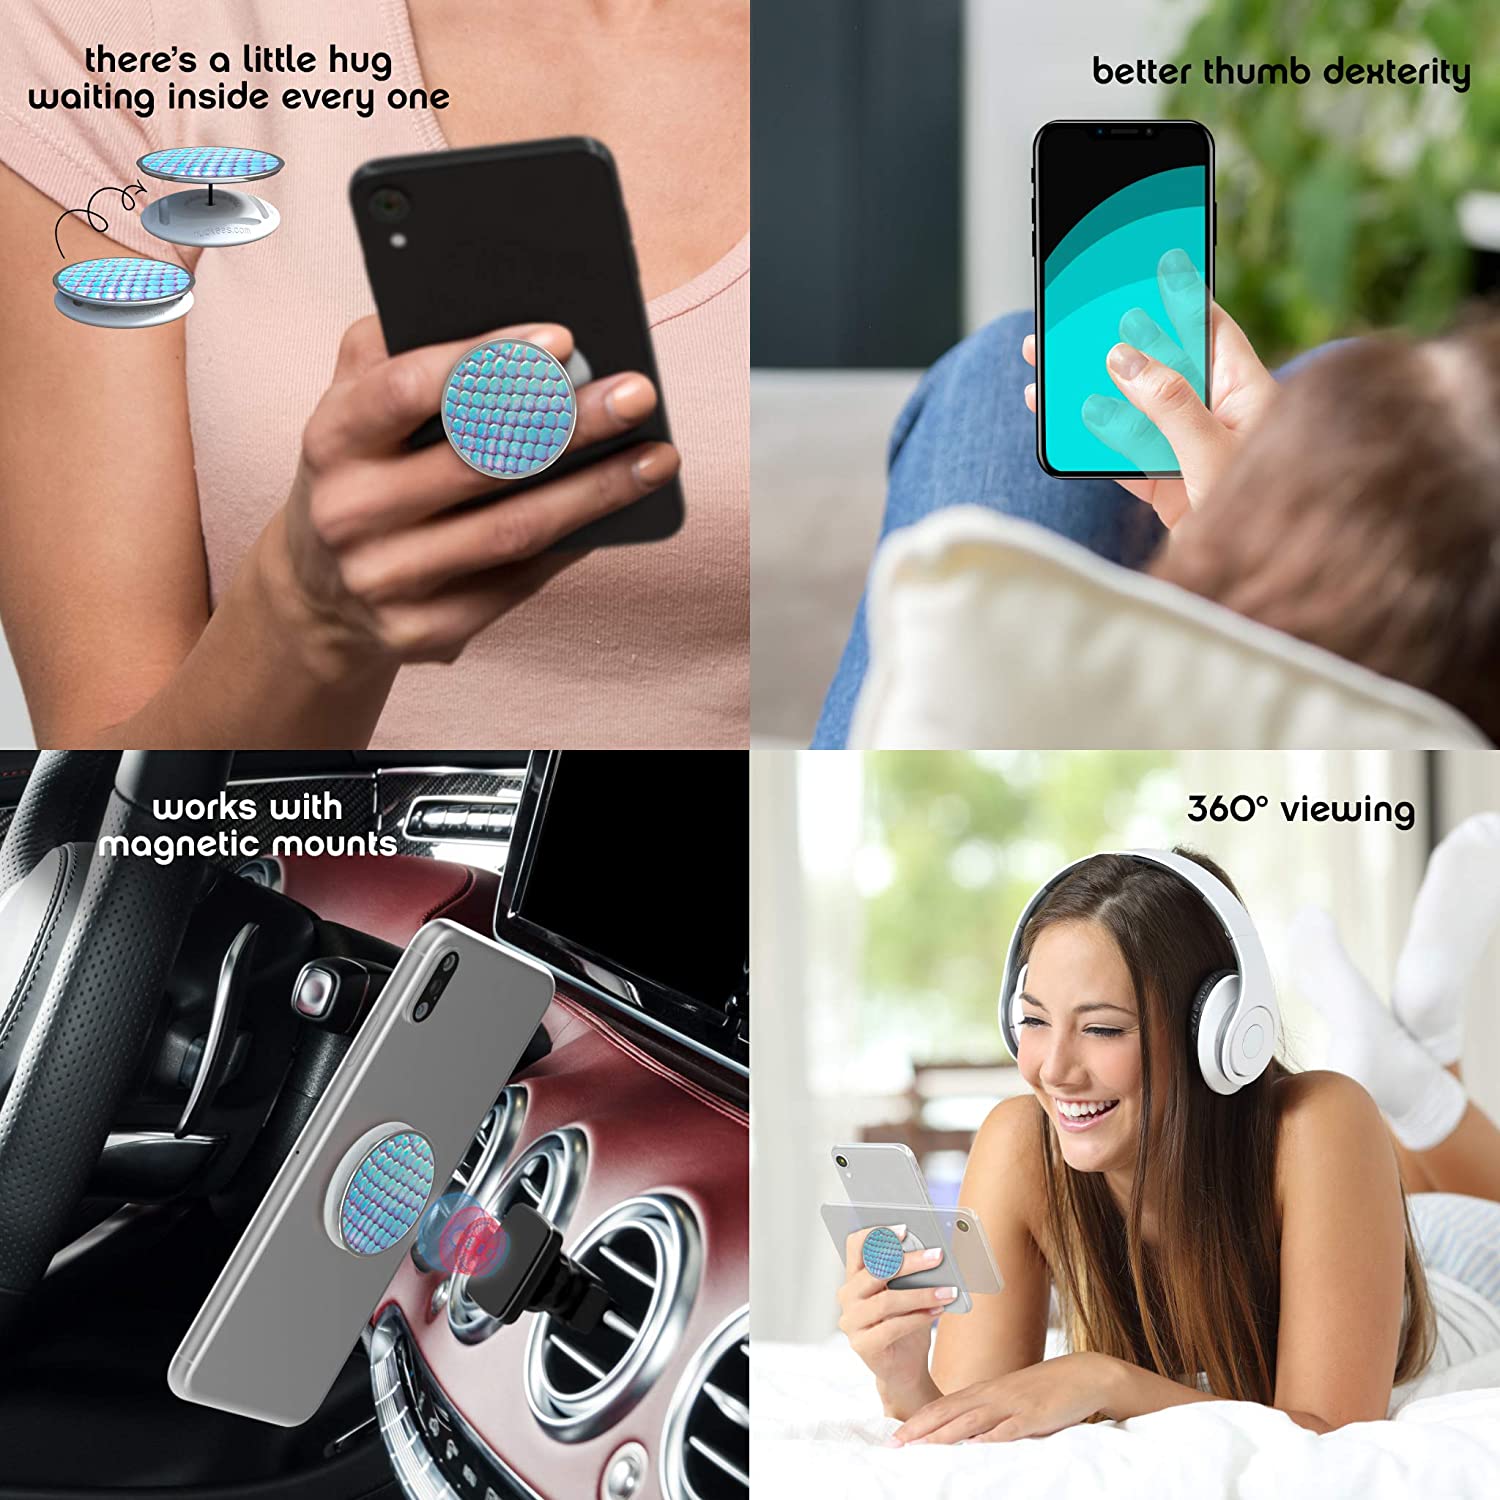 Tzumi Trends Nuckees Smartphone Grip And Stand